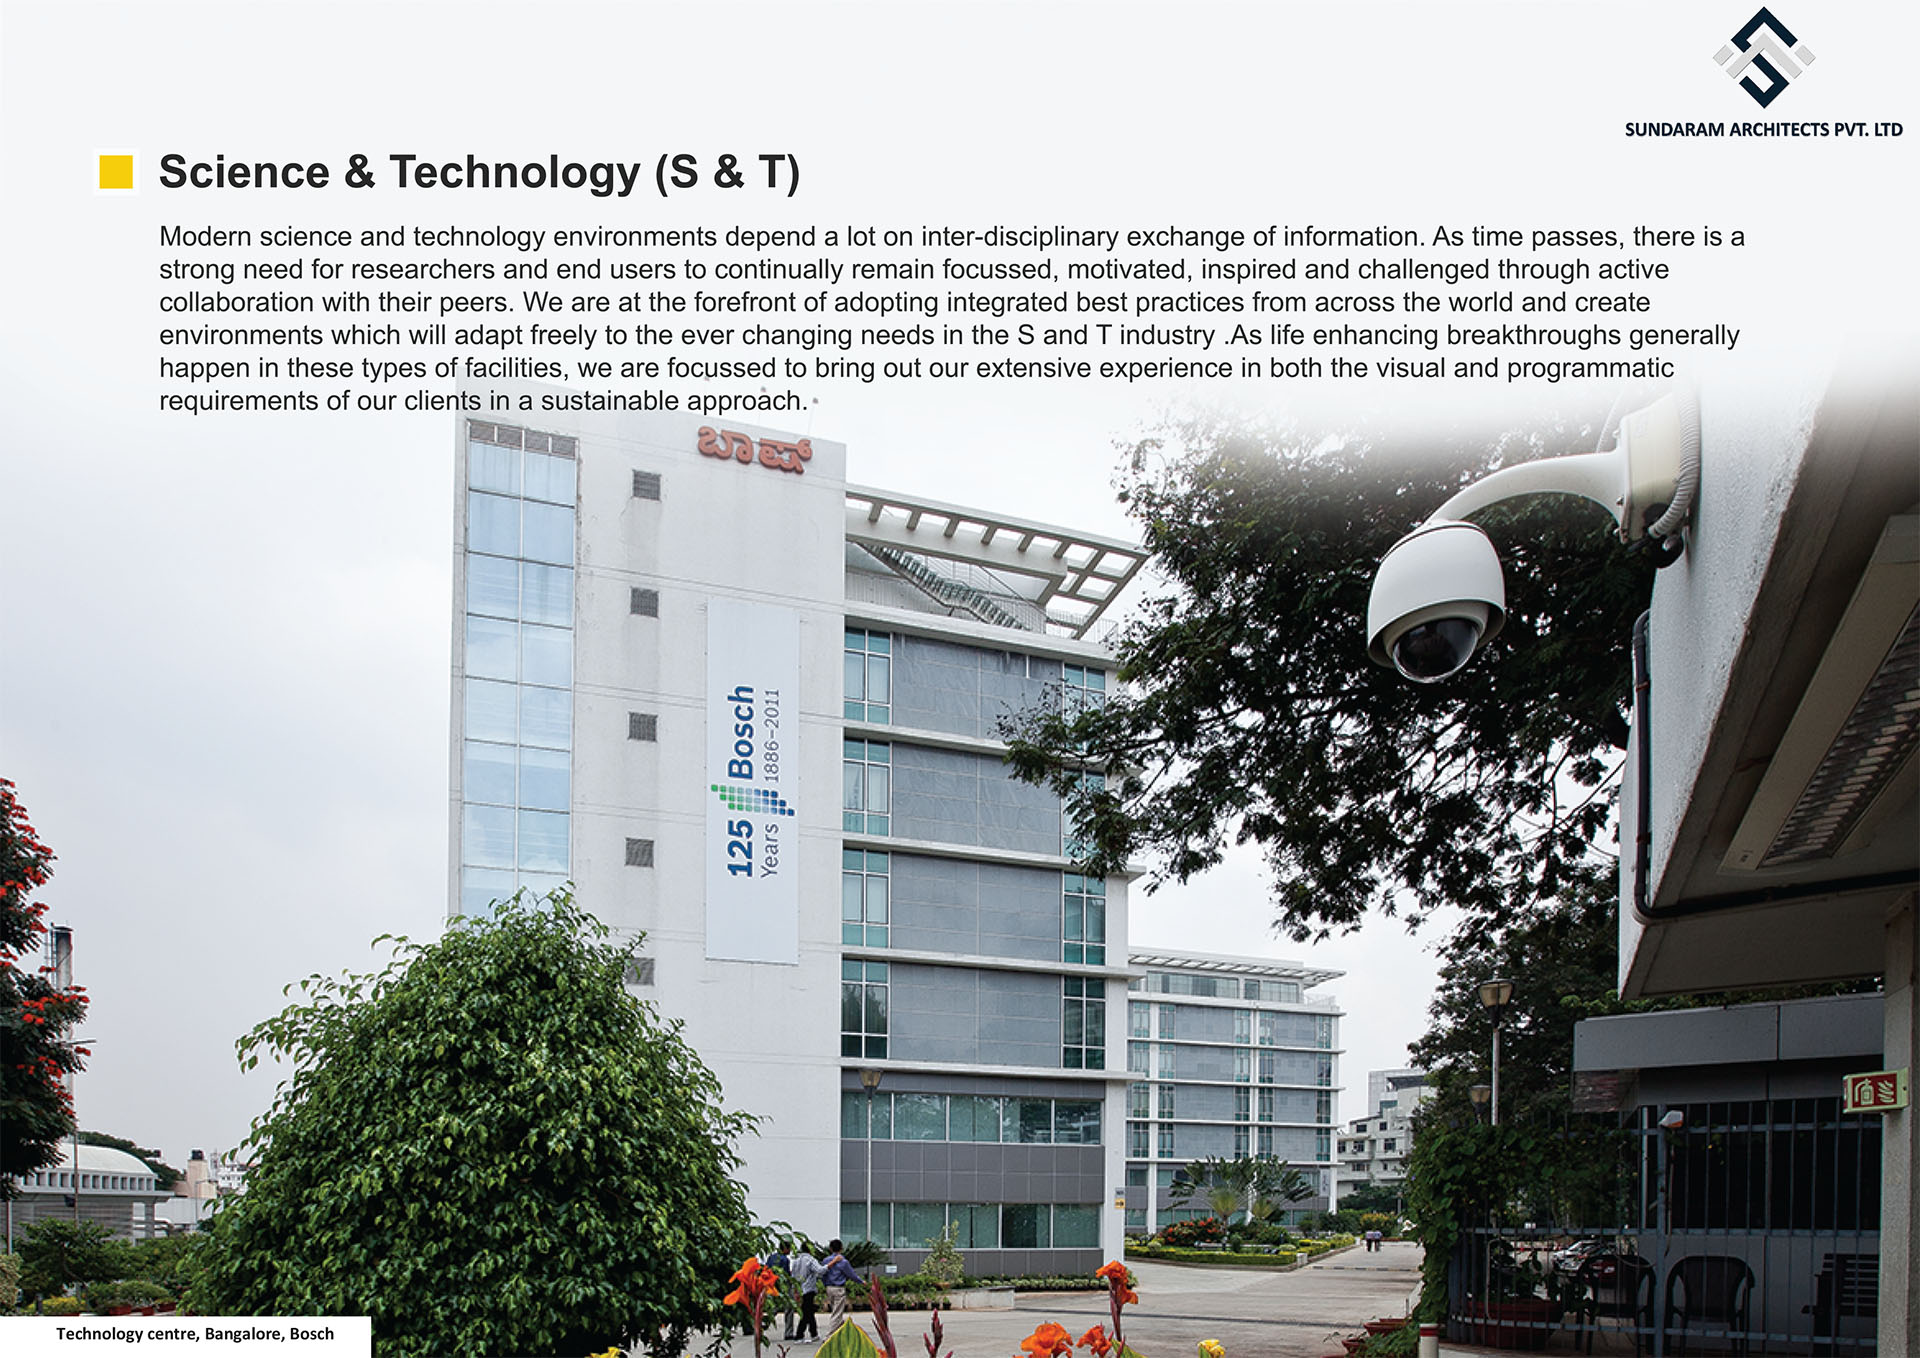 Technology Centre, Bangalore, Bosch - Science & Technology Design - Best Structural Design in India,Bangalore